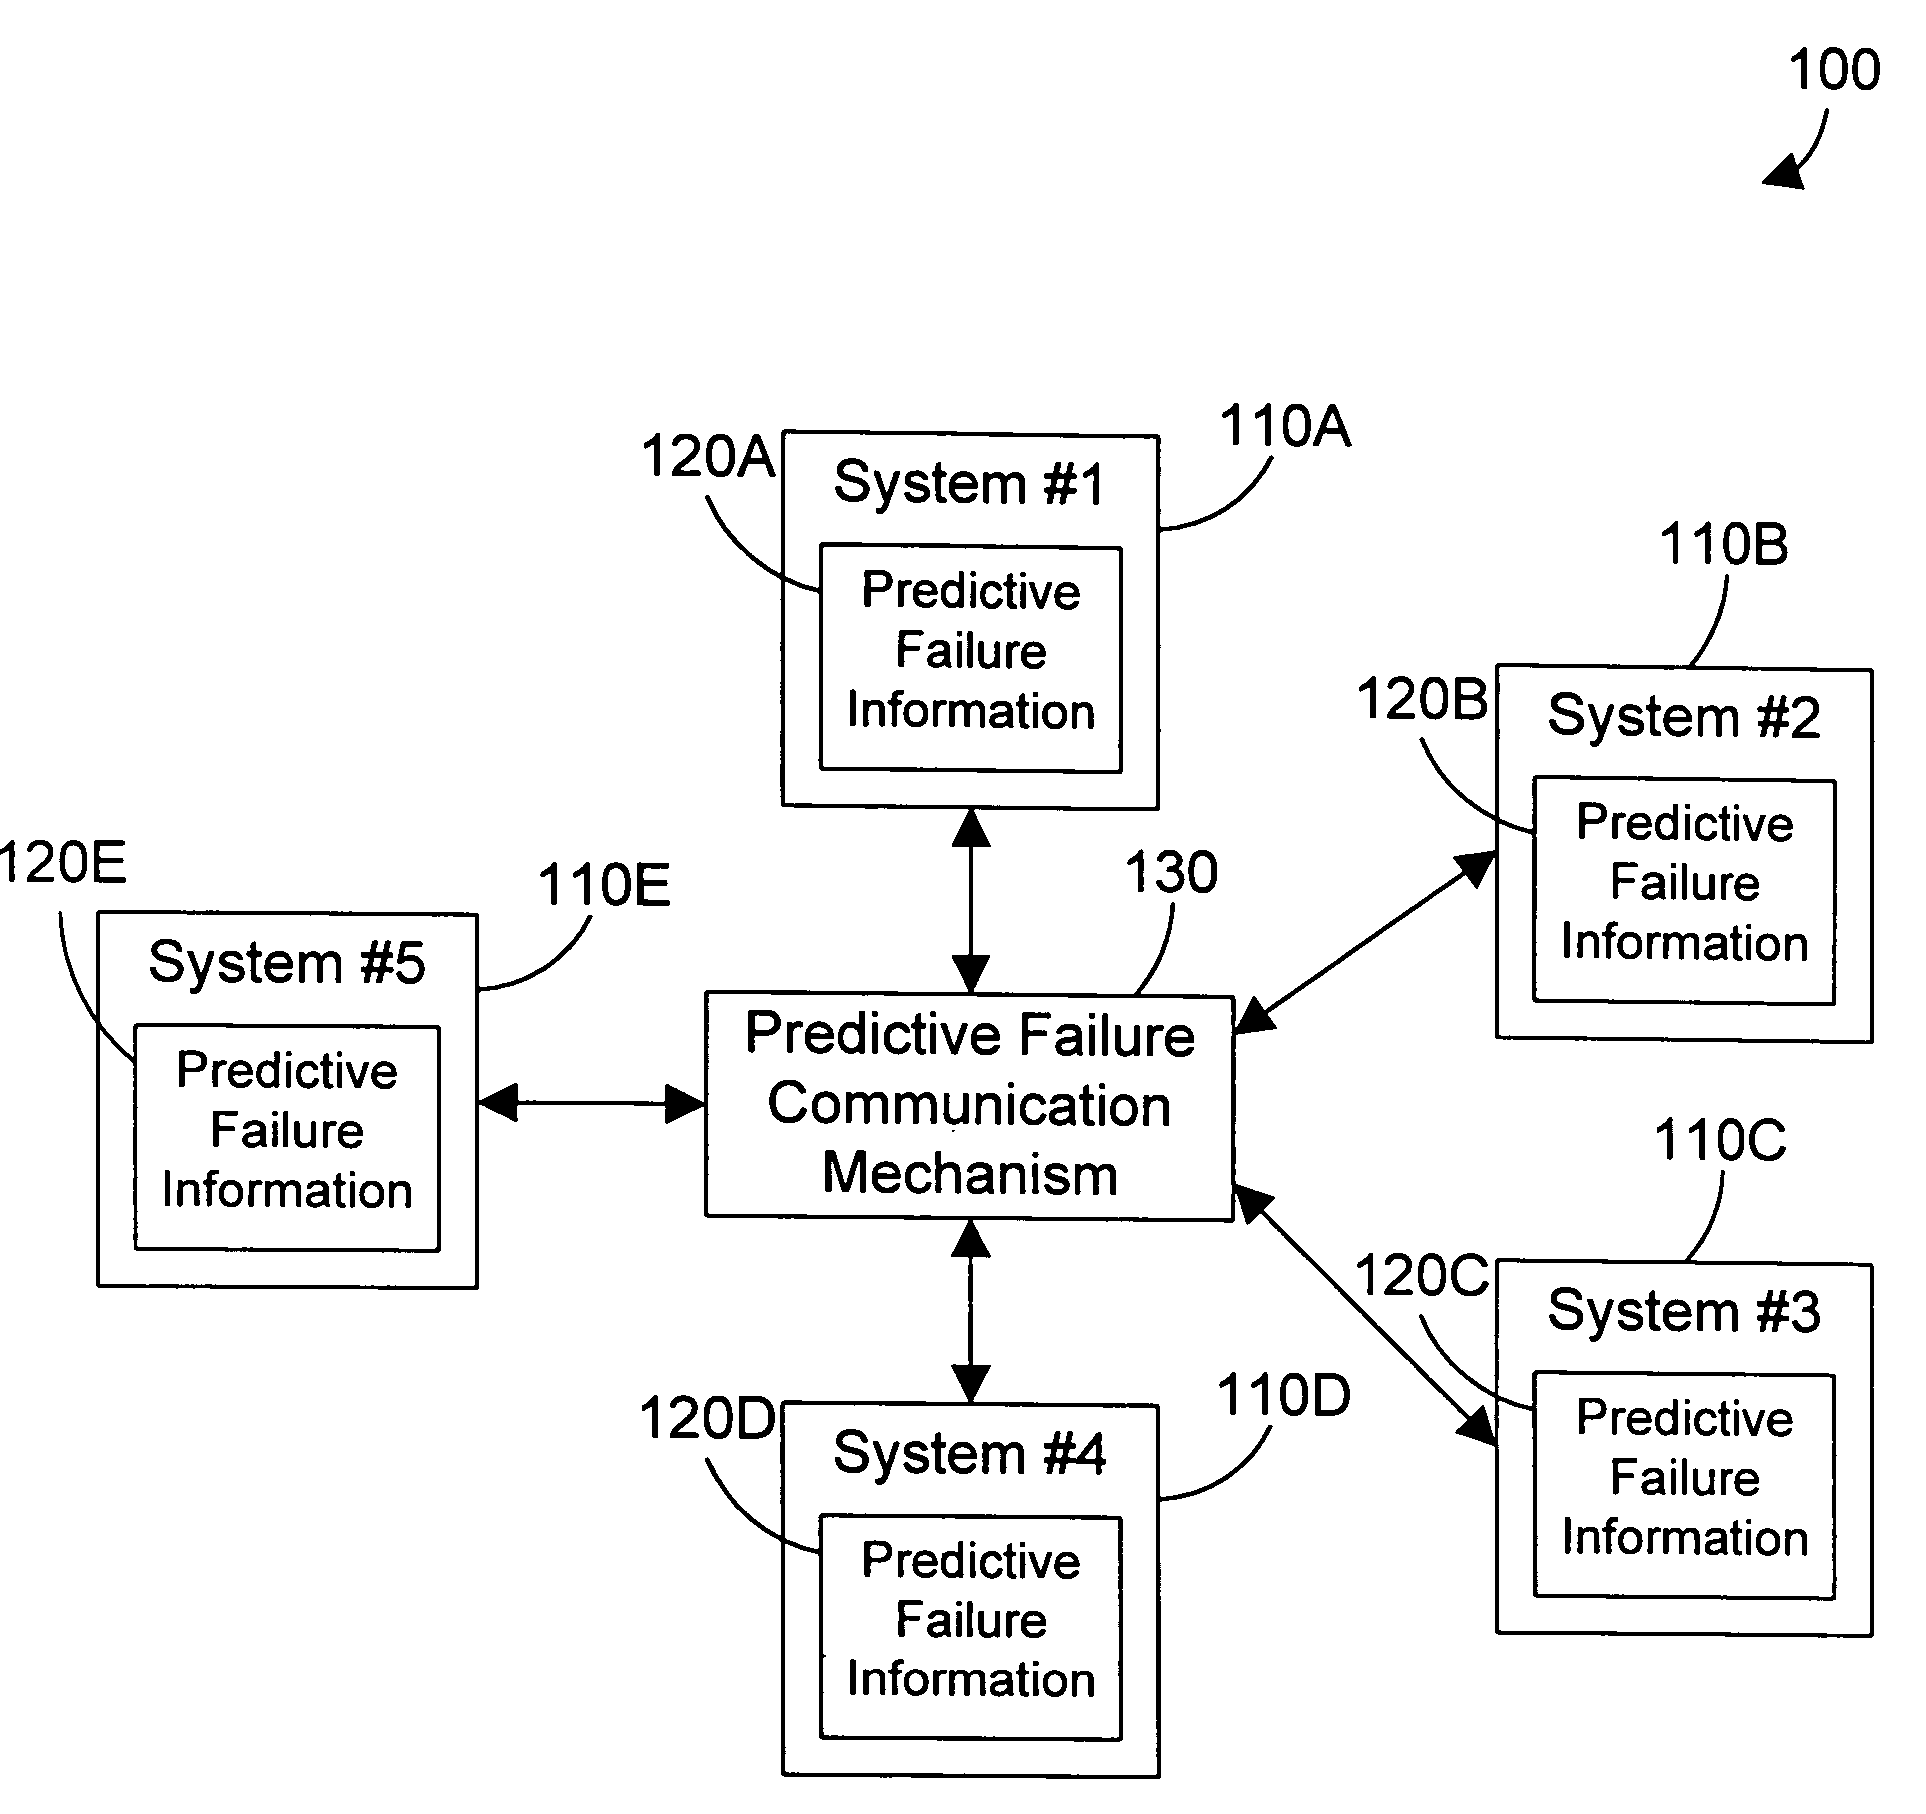 Apparatus and method for dynamically rerouting a network request based on shared predictive failure information